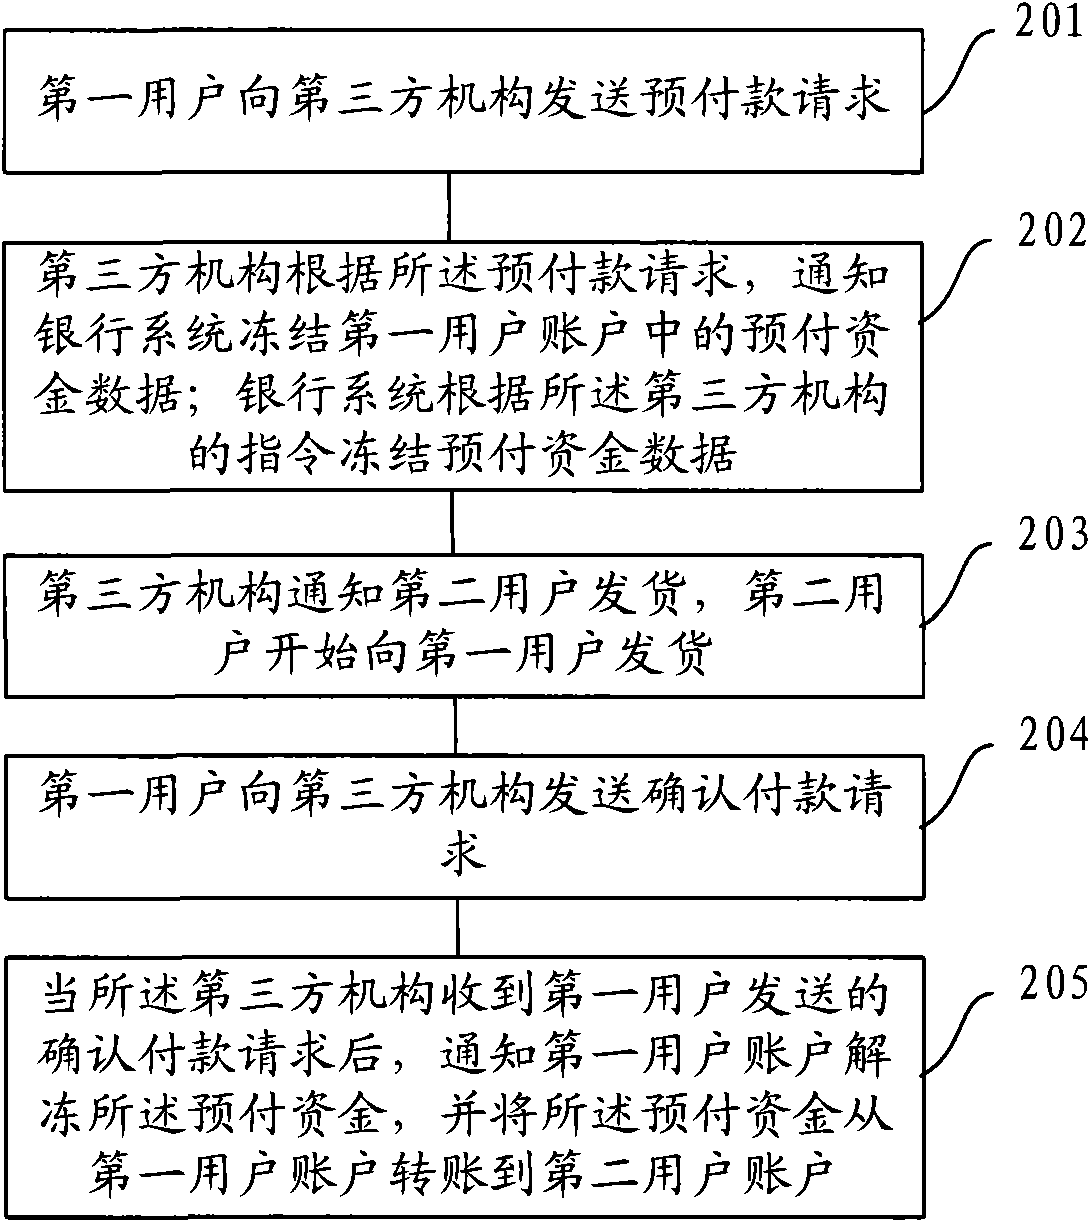 Method and system for processing transaction data and payment system